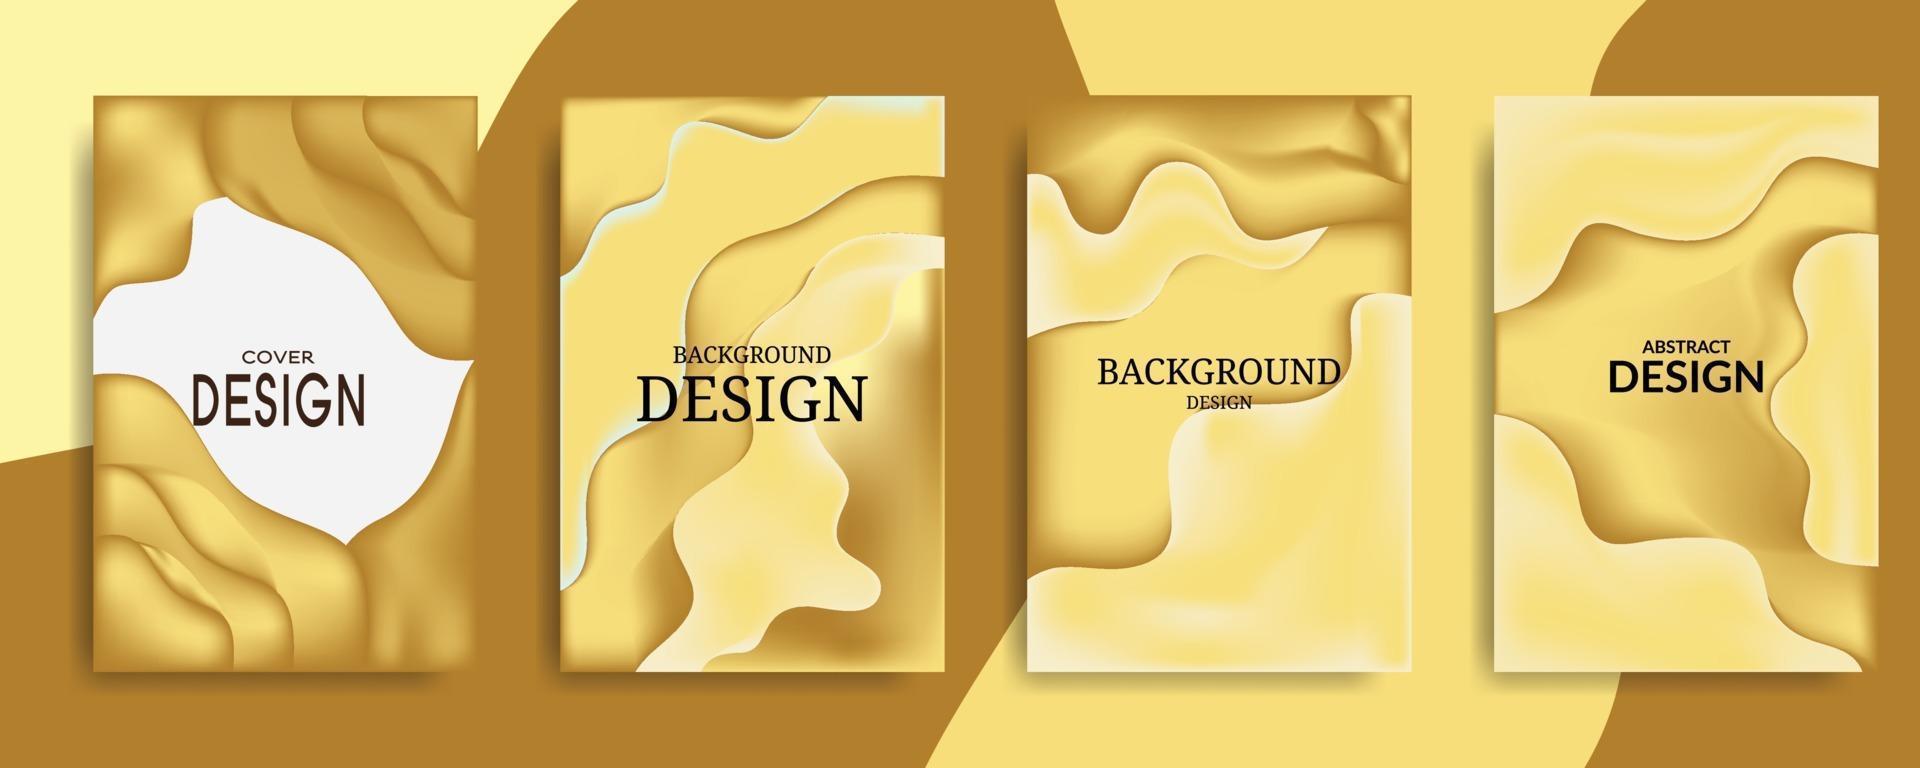 gold abstract gradient for cover background design vector templte